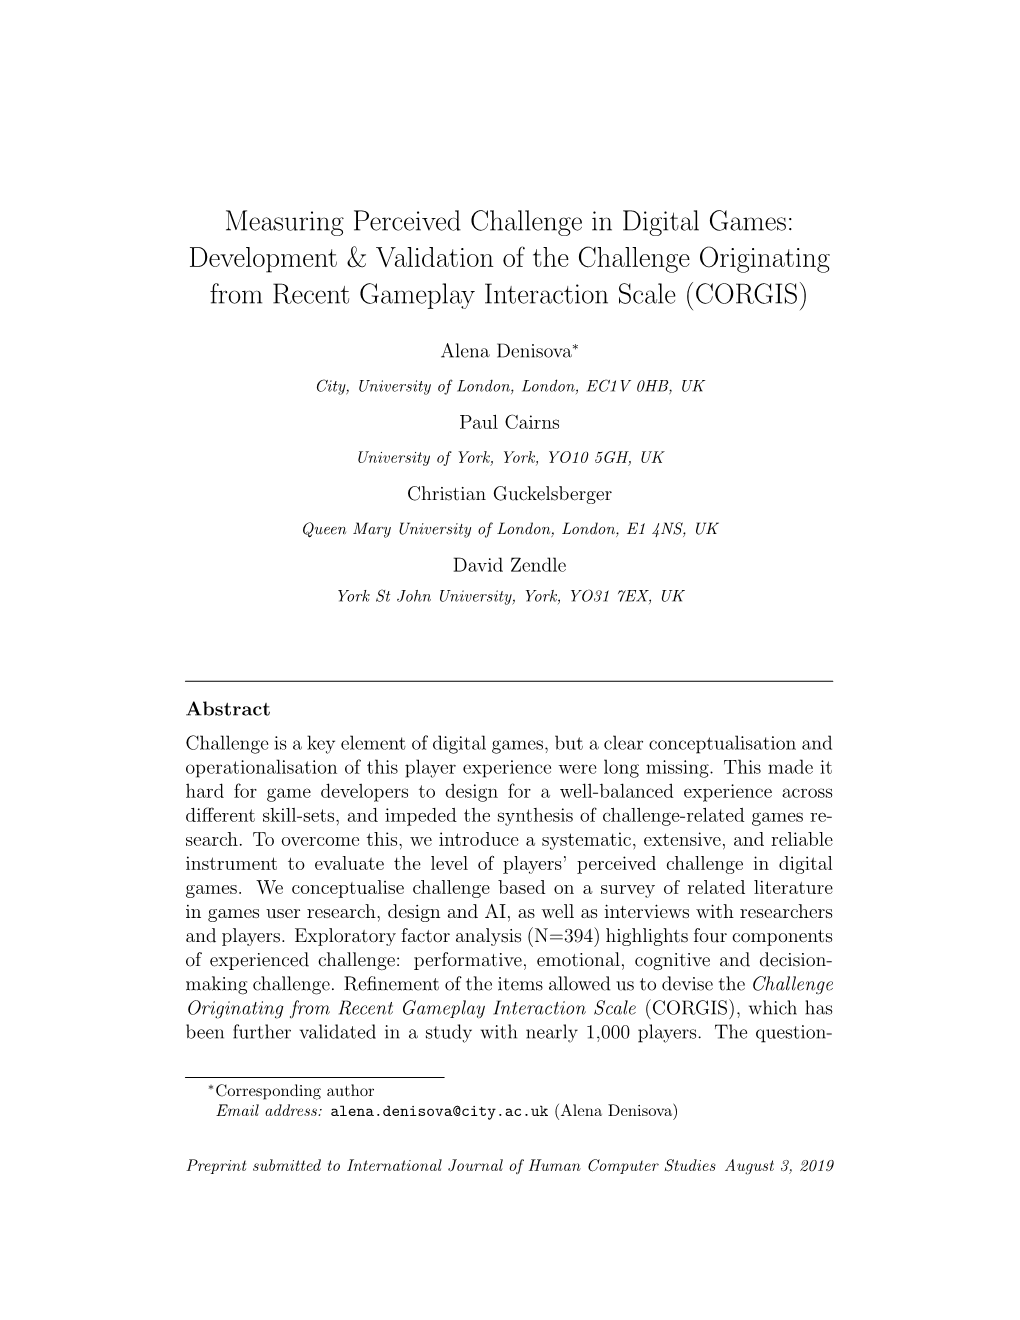 Measuring Perceived Challenge in Digital Games: Development & Validation of the Challenge Originating from Recent Gameplay Interaction Scale (CORGIS)